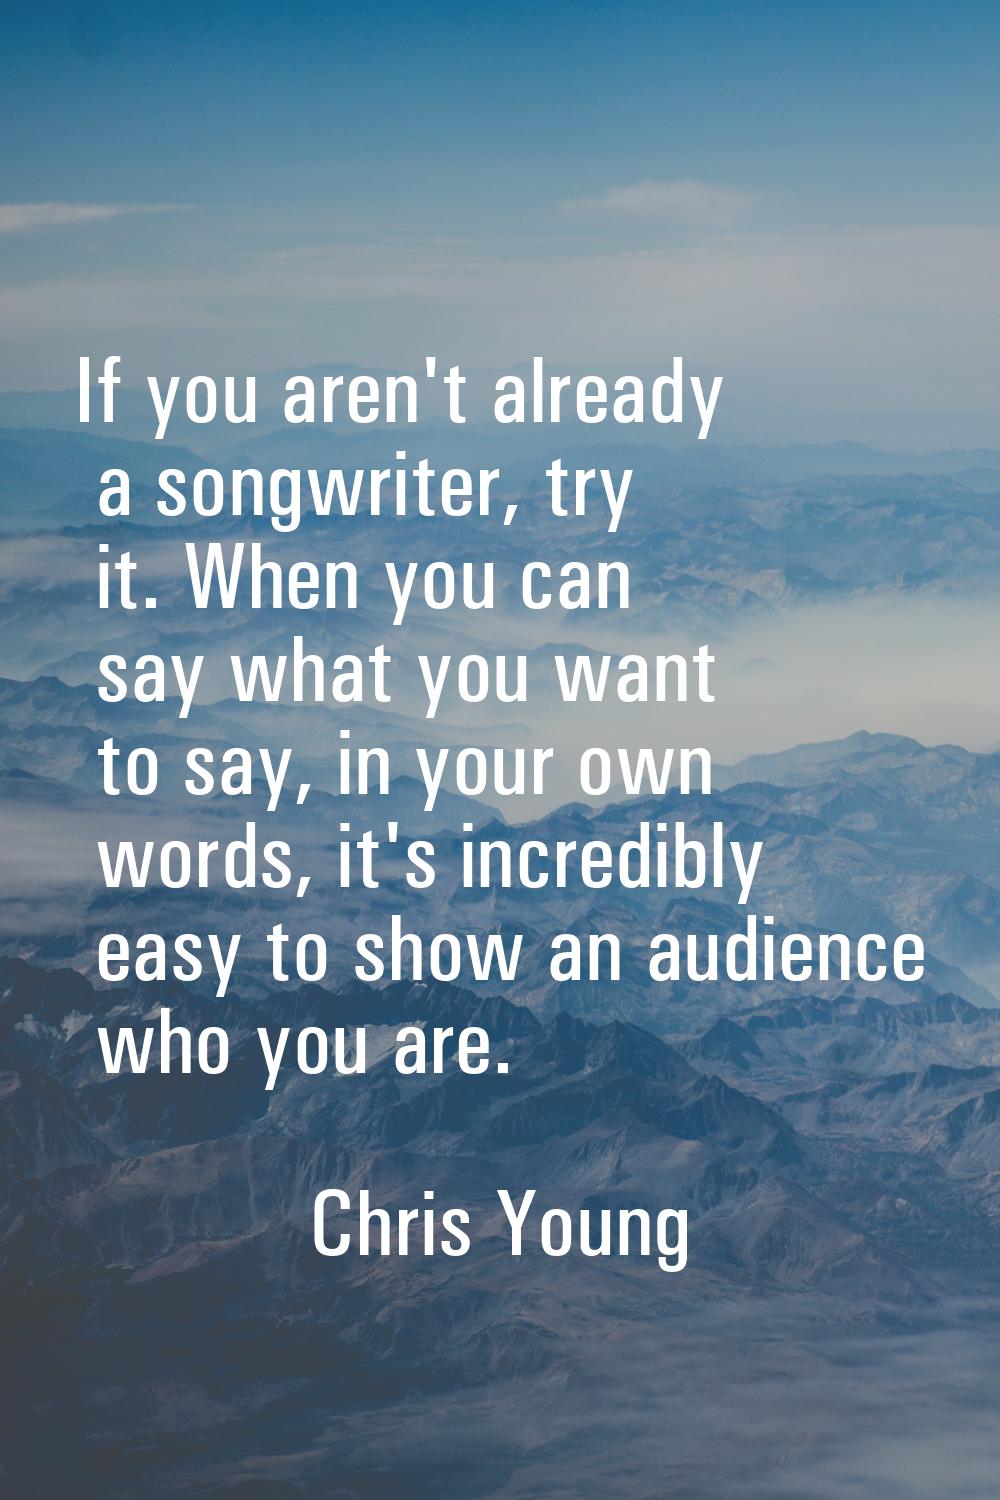 If you aren't already a songwriter, try it. When you can say what you want to say, in your own word